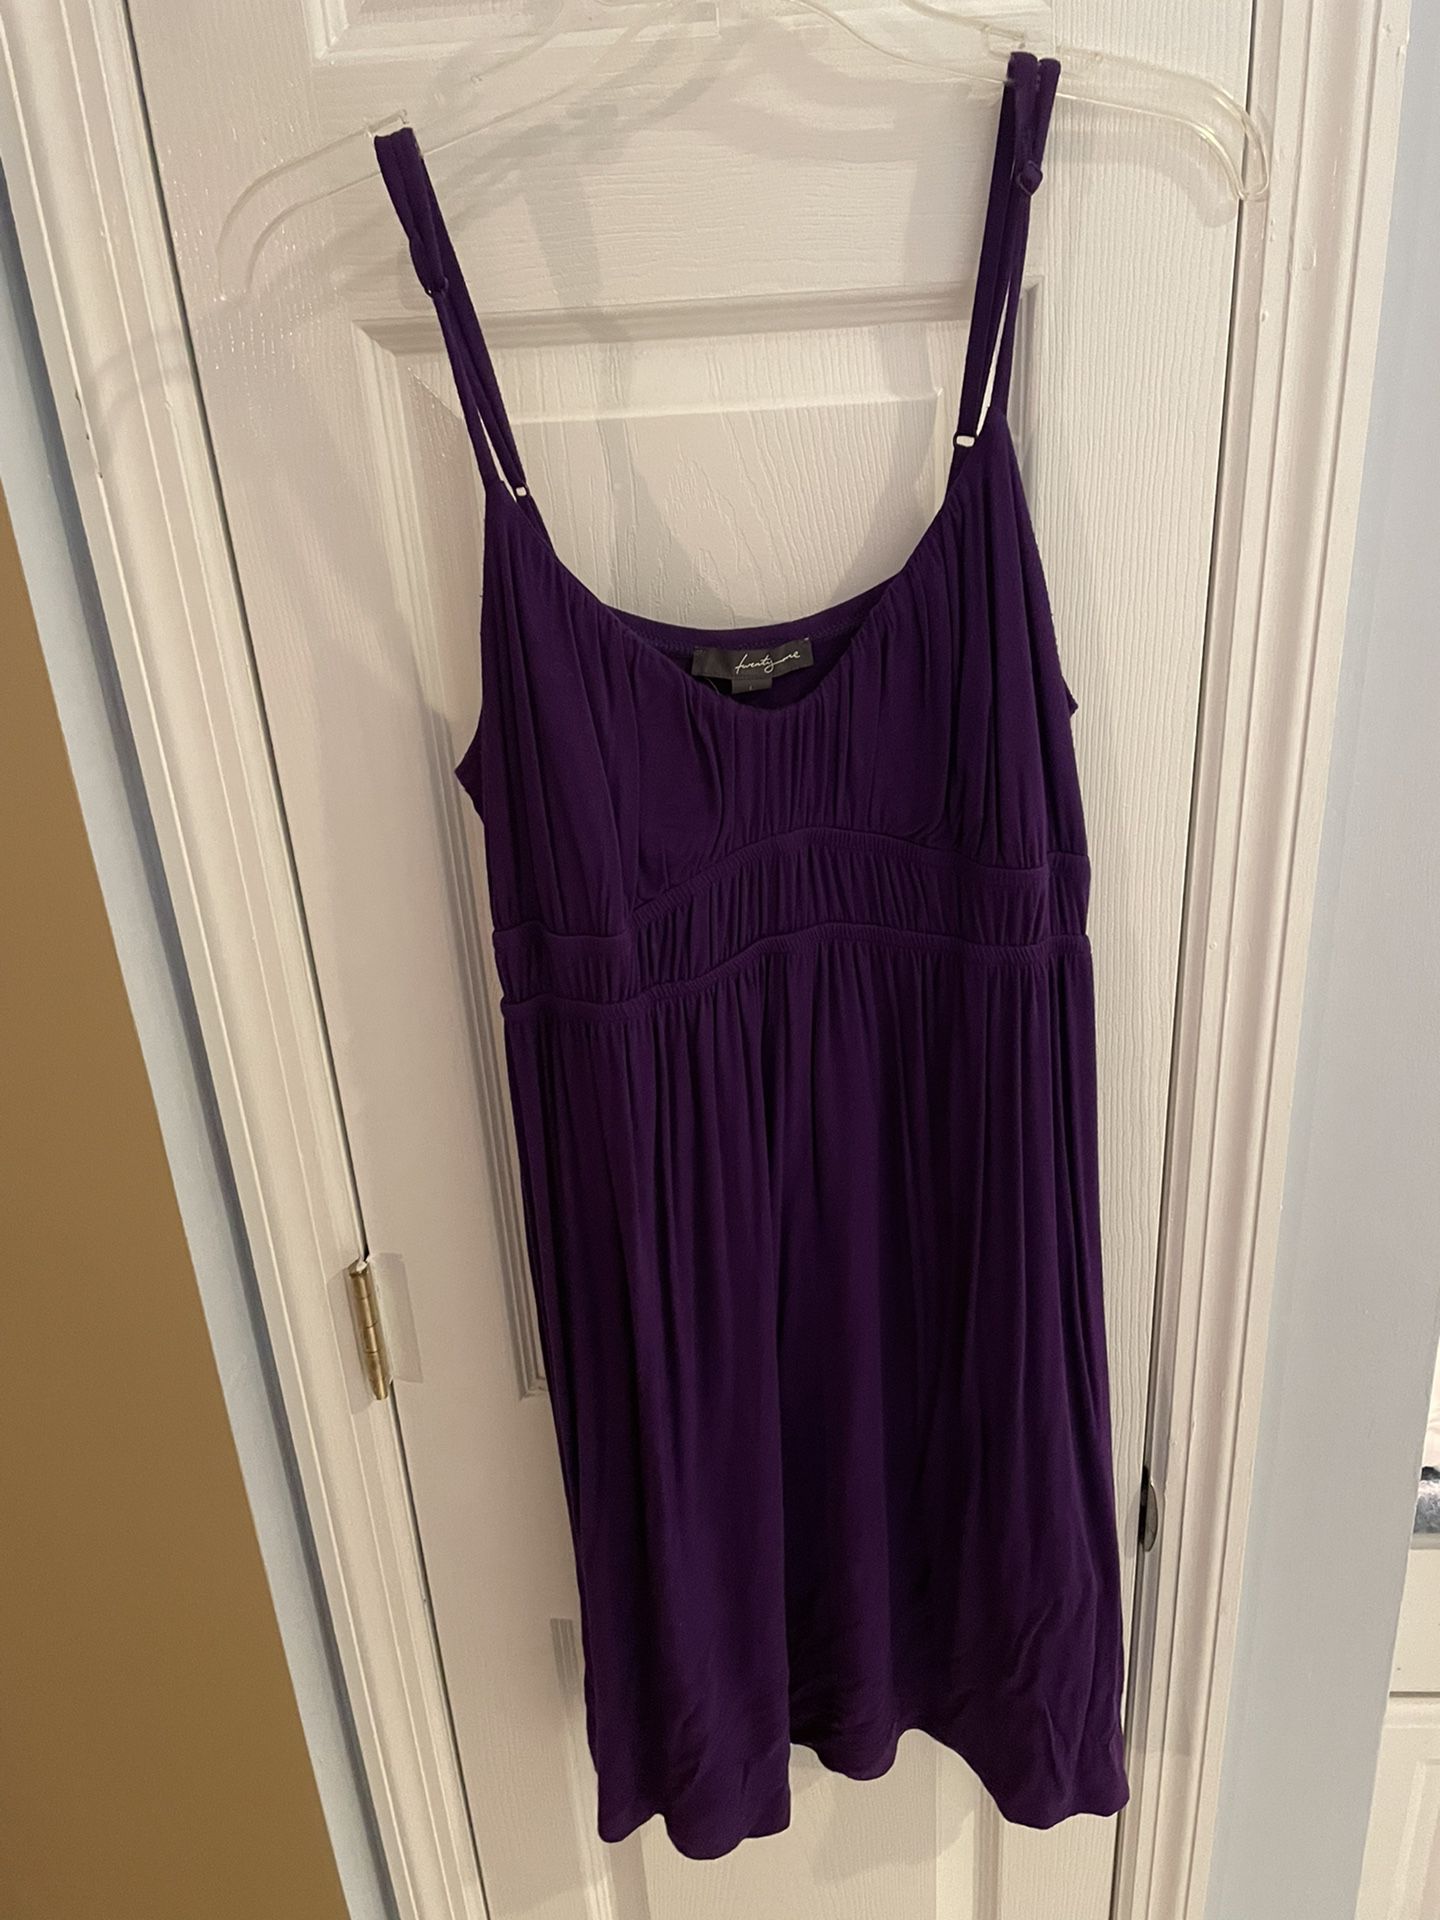 Forever 21 Purple Dress Size Large